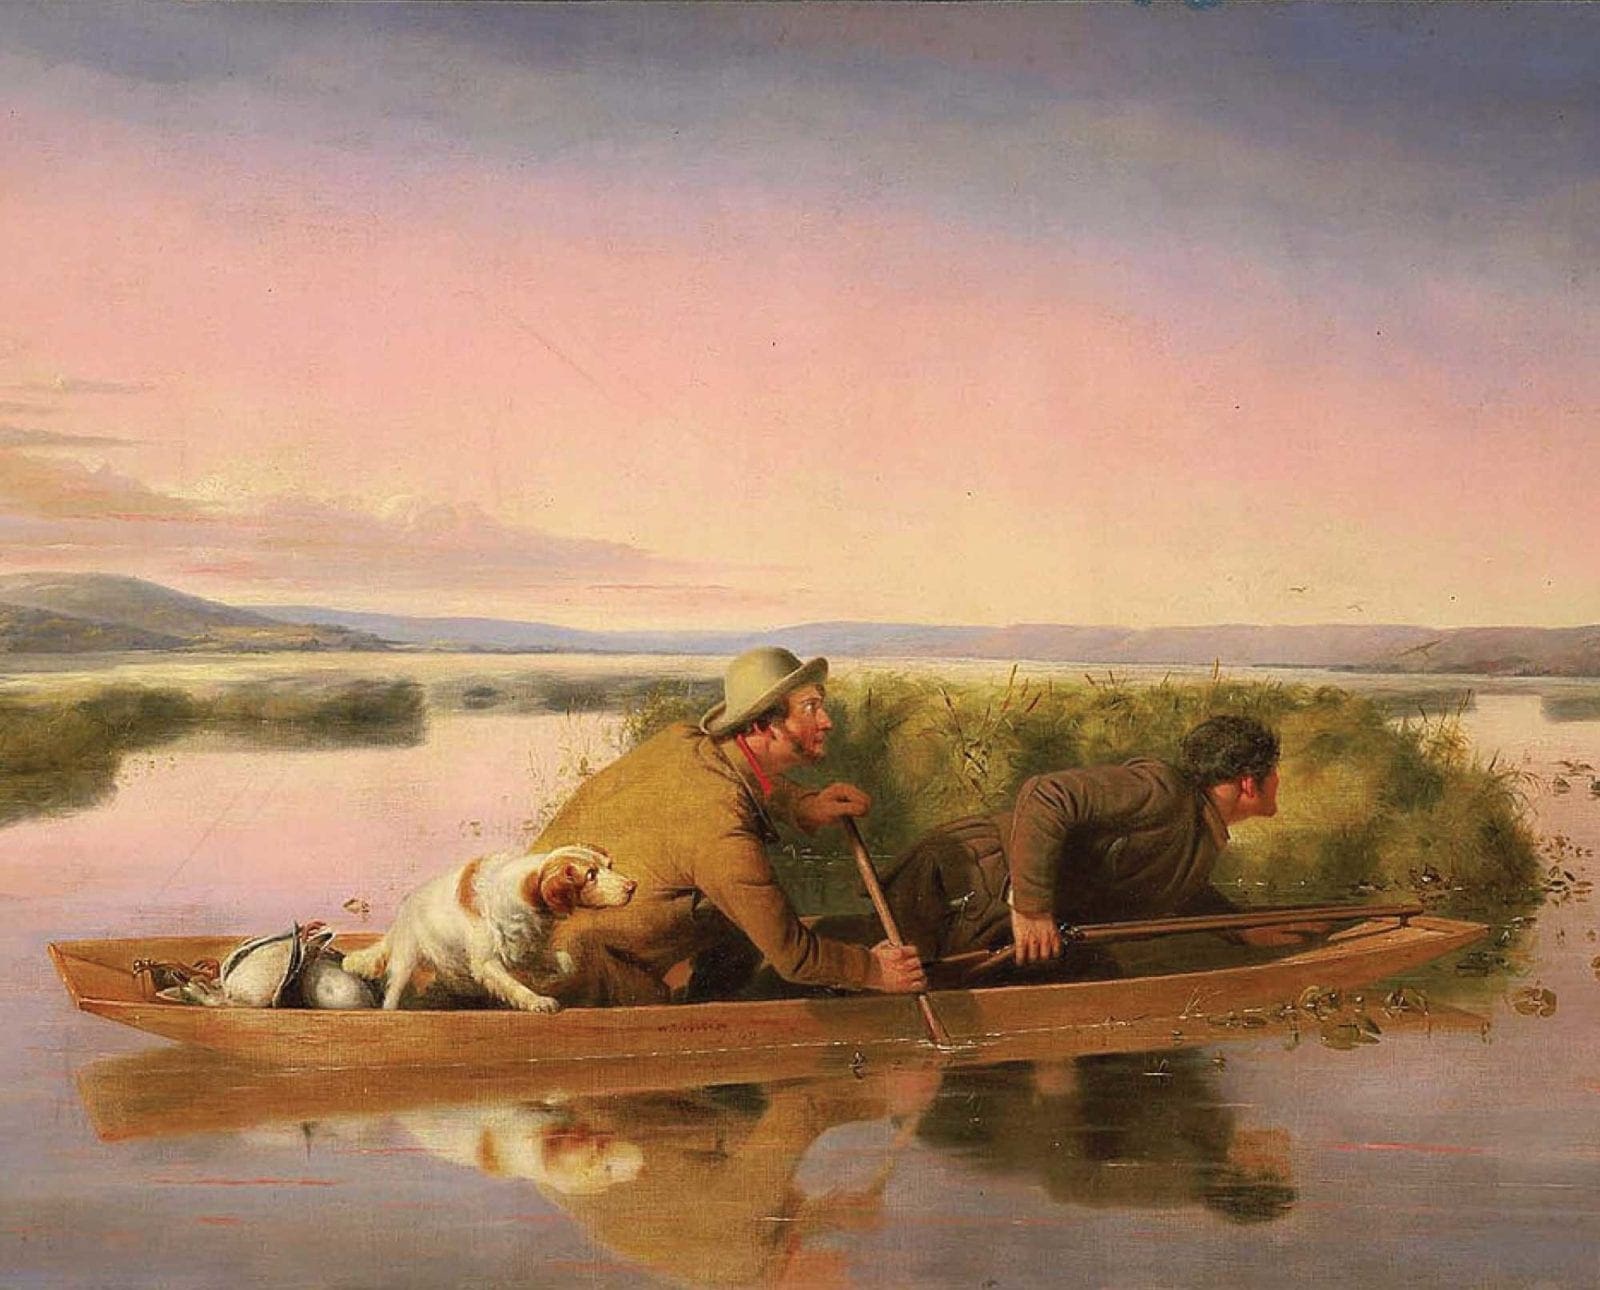 Painting of two duck hunters and a spaniel in a canoe